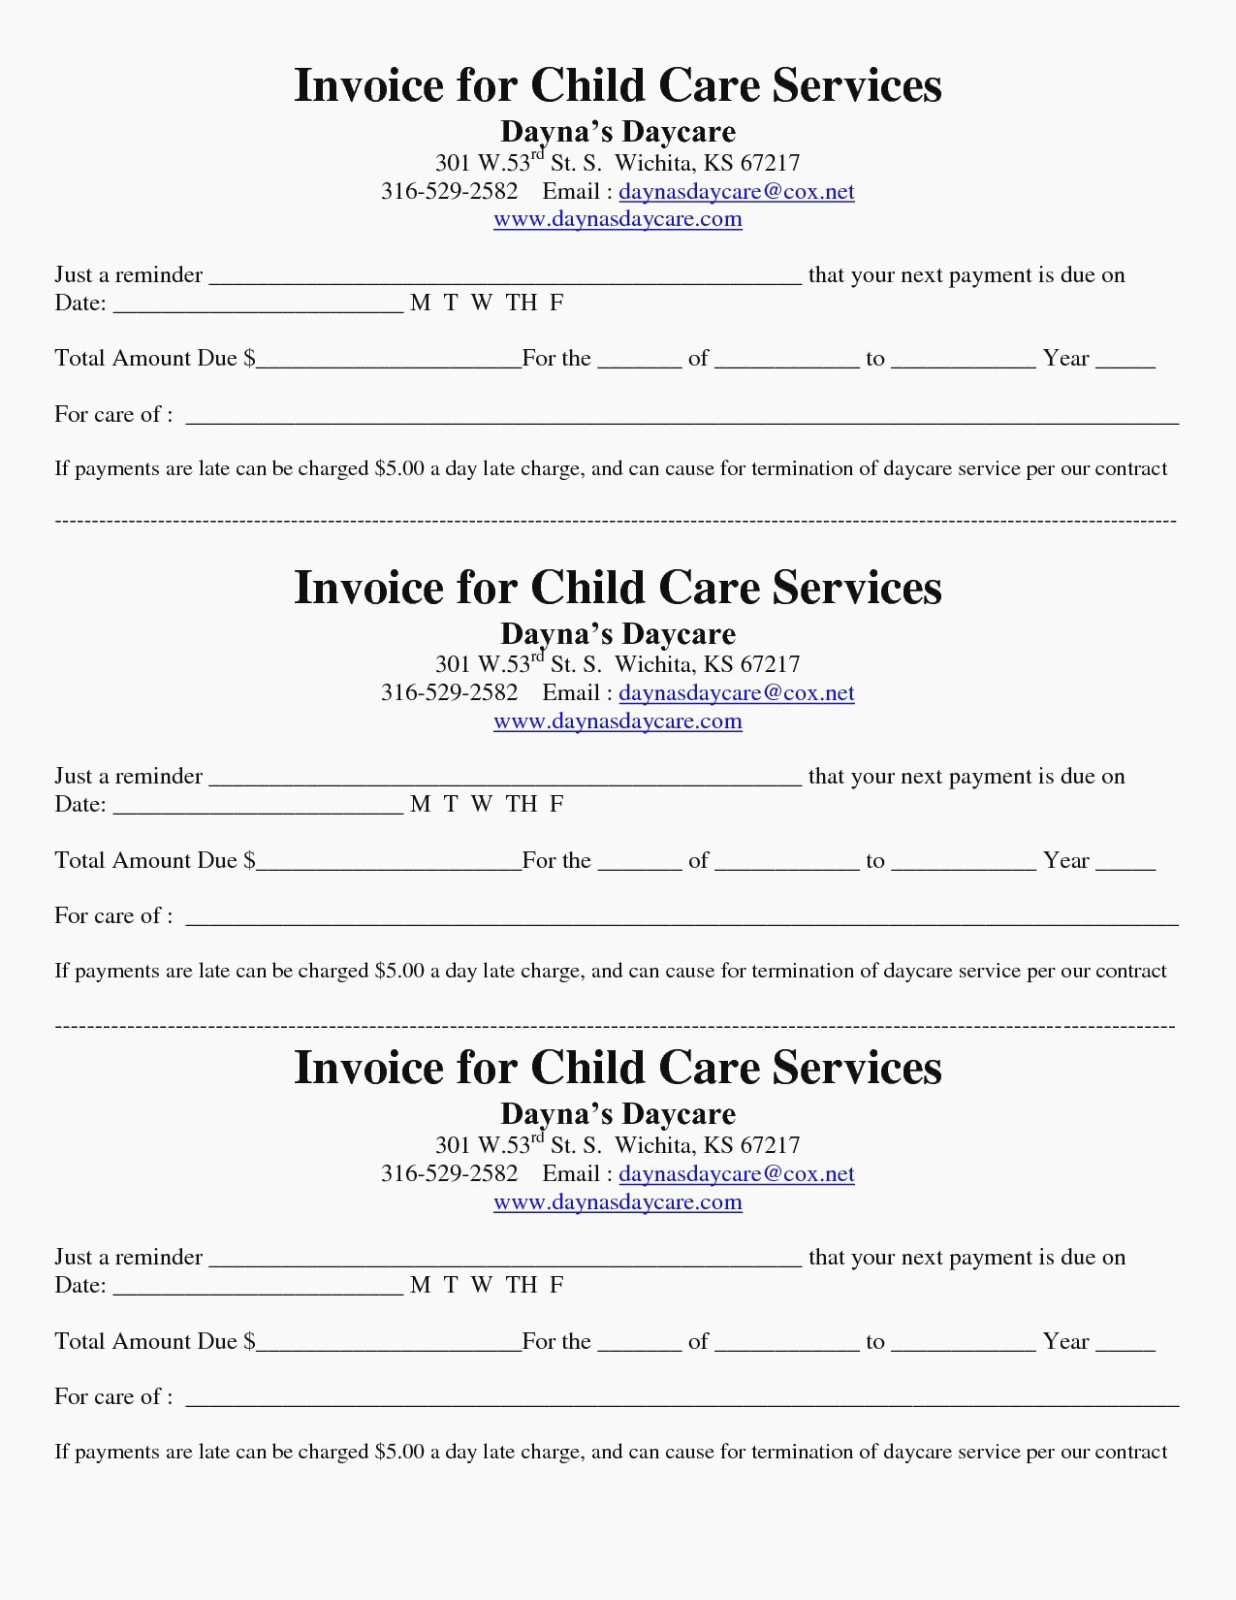 Child Care Invoice Template Luxury 14 Things You Should Know